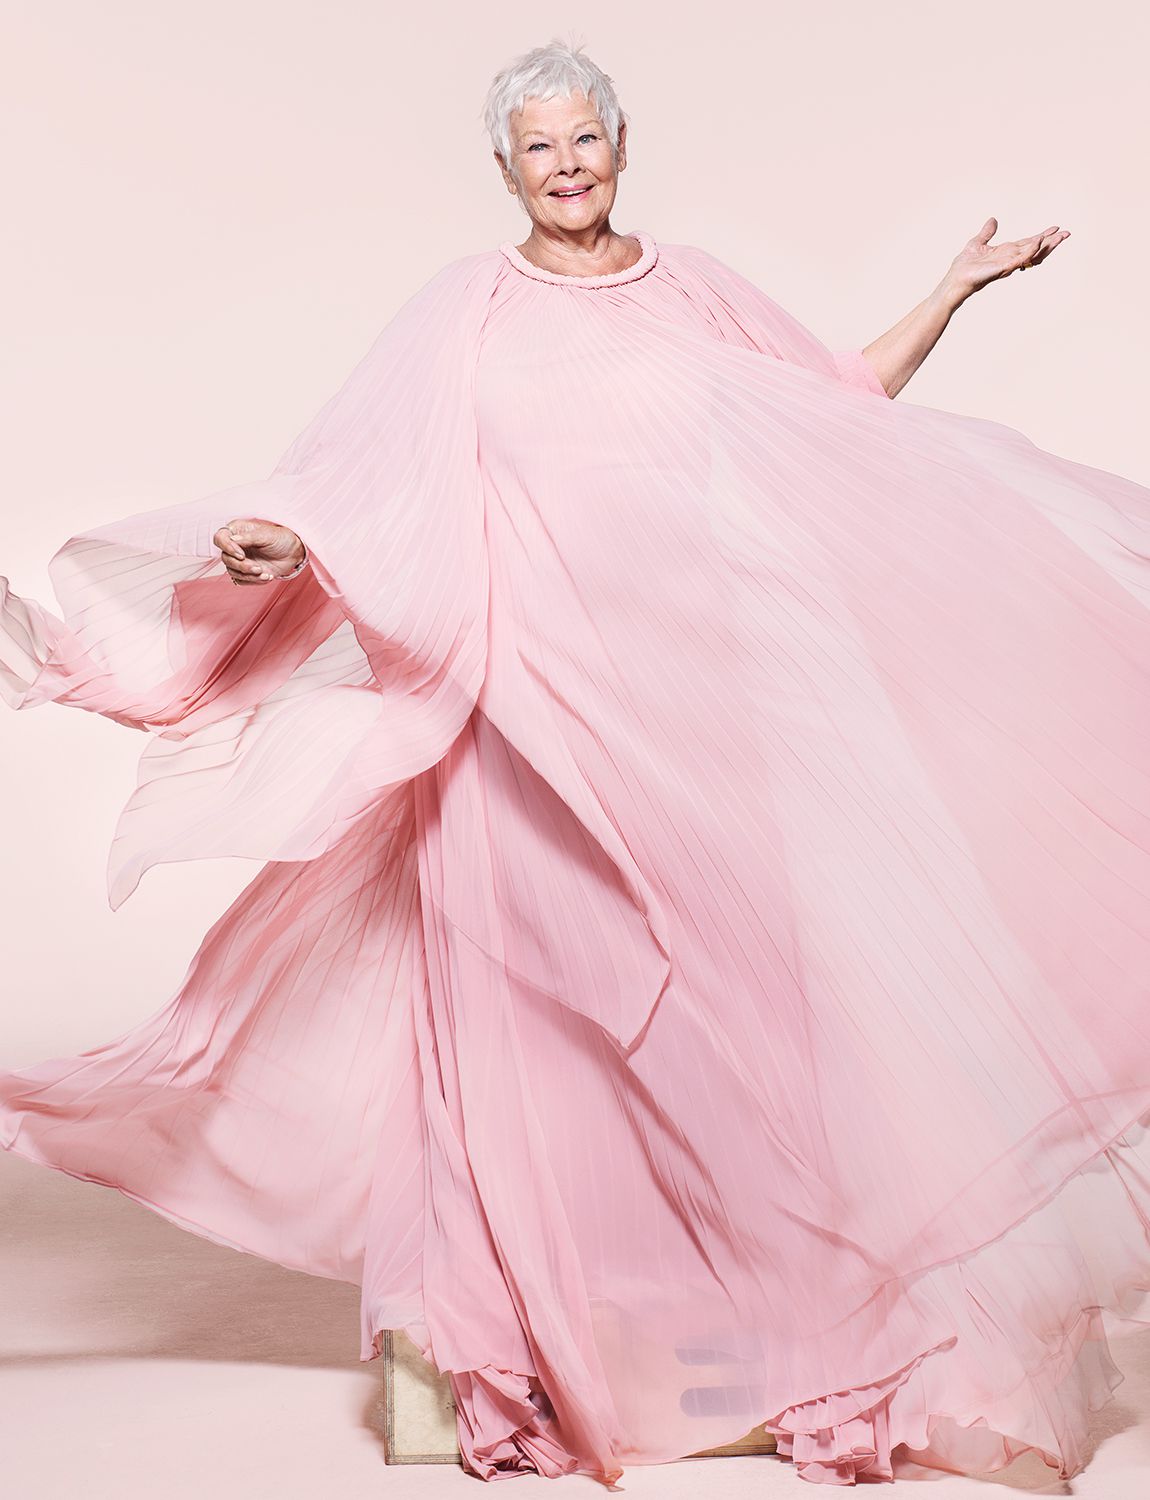 Judi Dench by Nick Knight for British Vogue's June 2020 issue